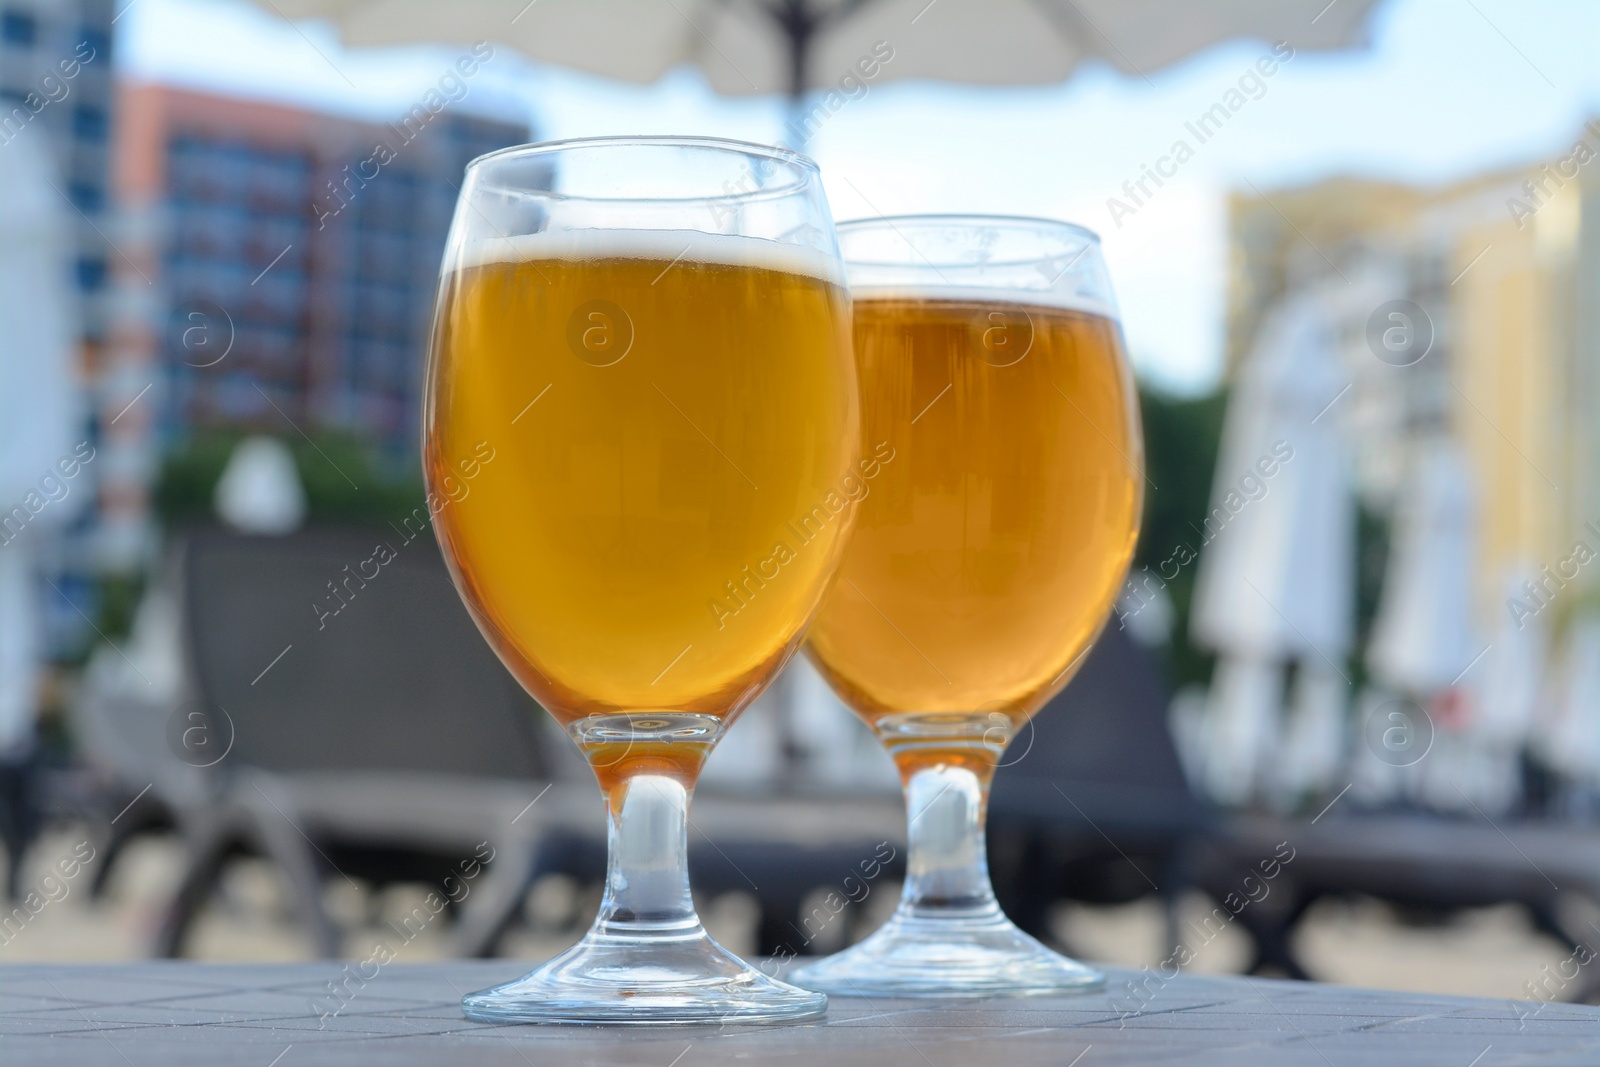 Photo of Cold beer in glass on beach, closeup